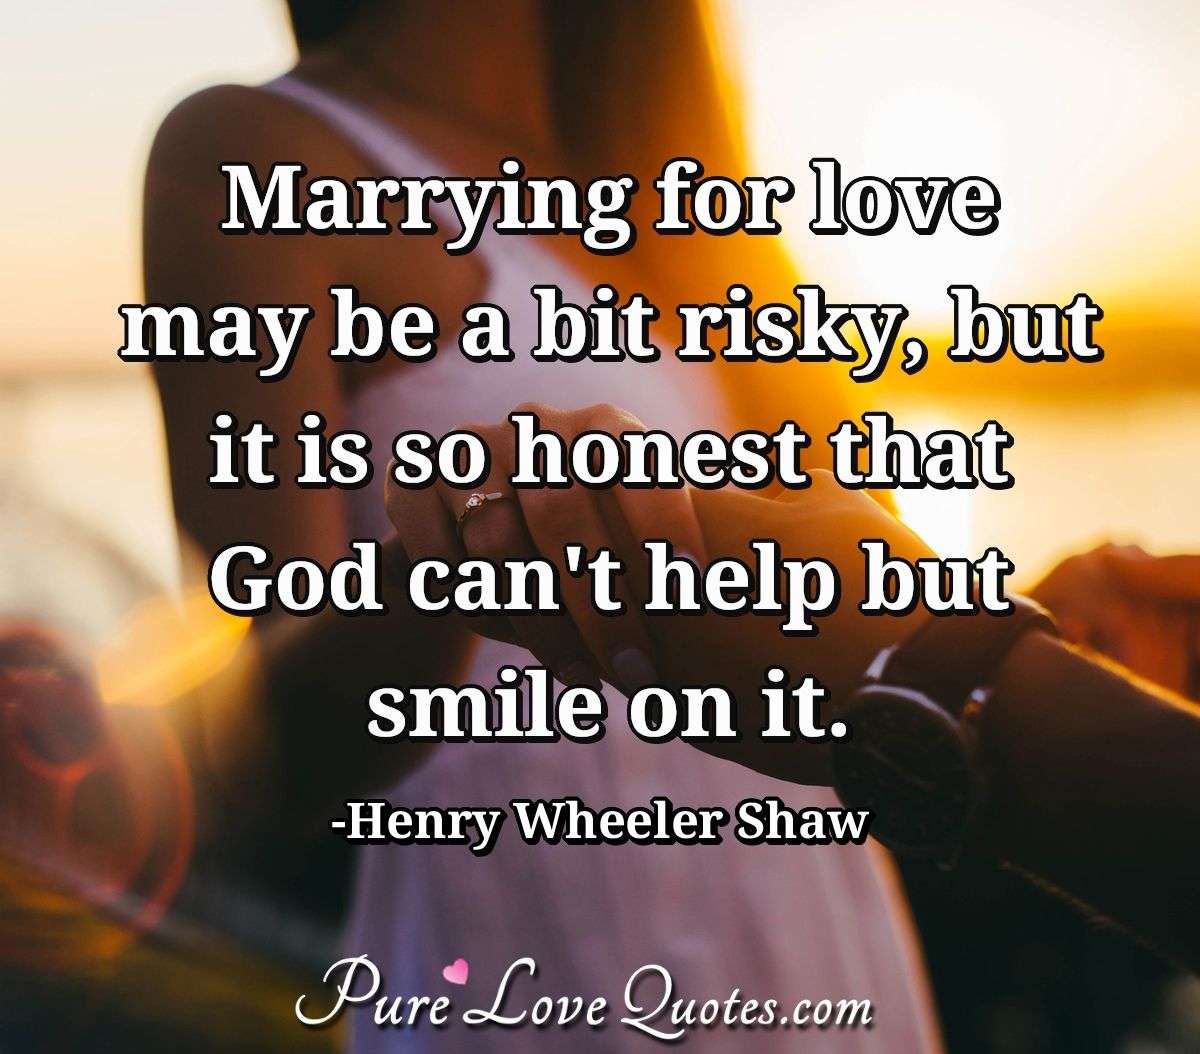 Marrying for love may be a bit risky, but it is so honest that God can't help but smile on it. - Henry Wheeler Shaw